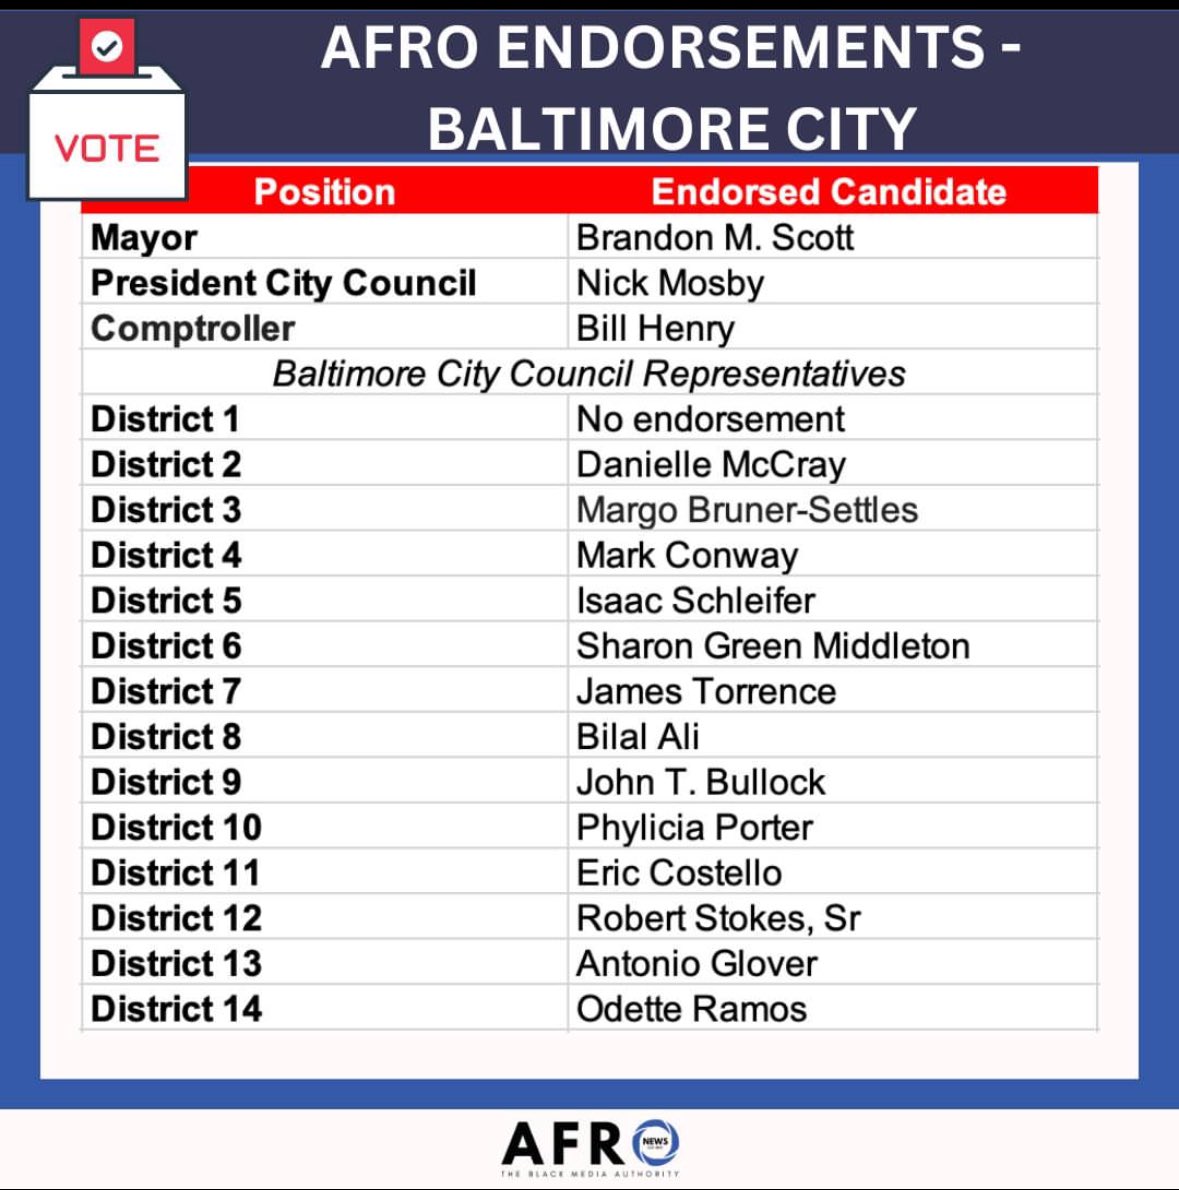 The AFRO announced its full slate of endorsements for the 2024 campaign! “Our endorsement process includes valuable input from community members, particularly individuals …,” said AFRO Pub/CEO Dr. Frances “Toni” Draper More on afro.com #afronews #endorsements